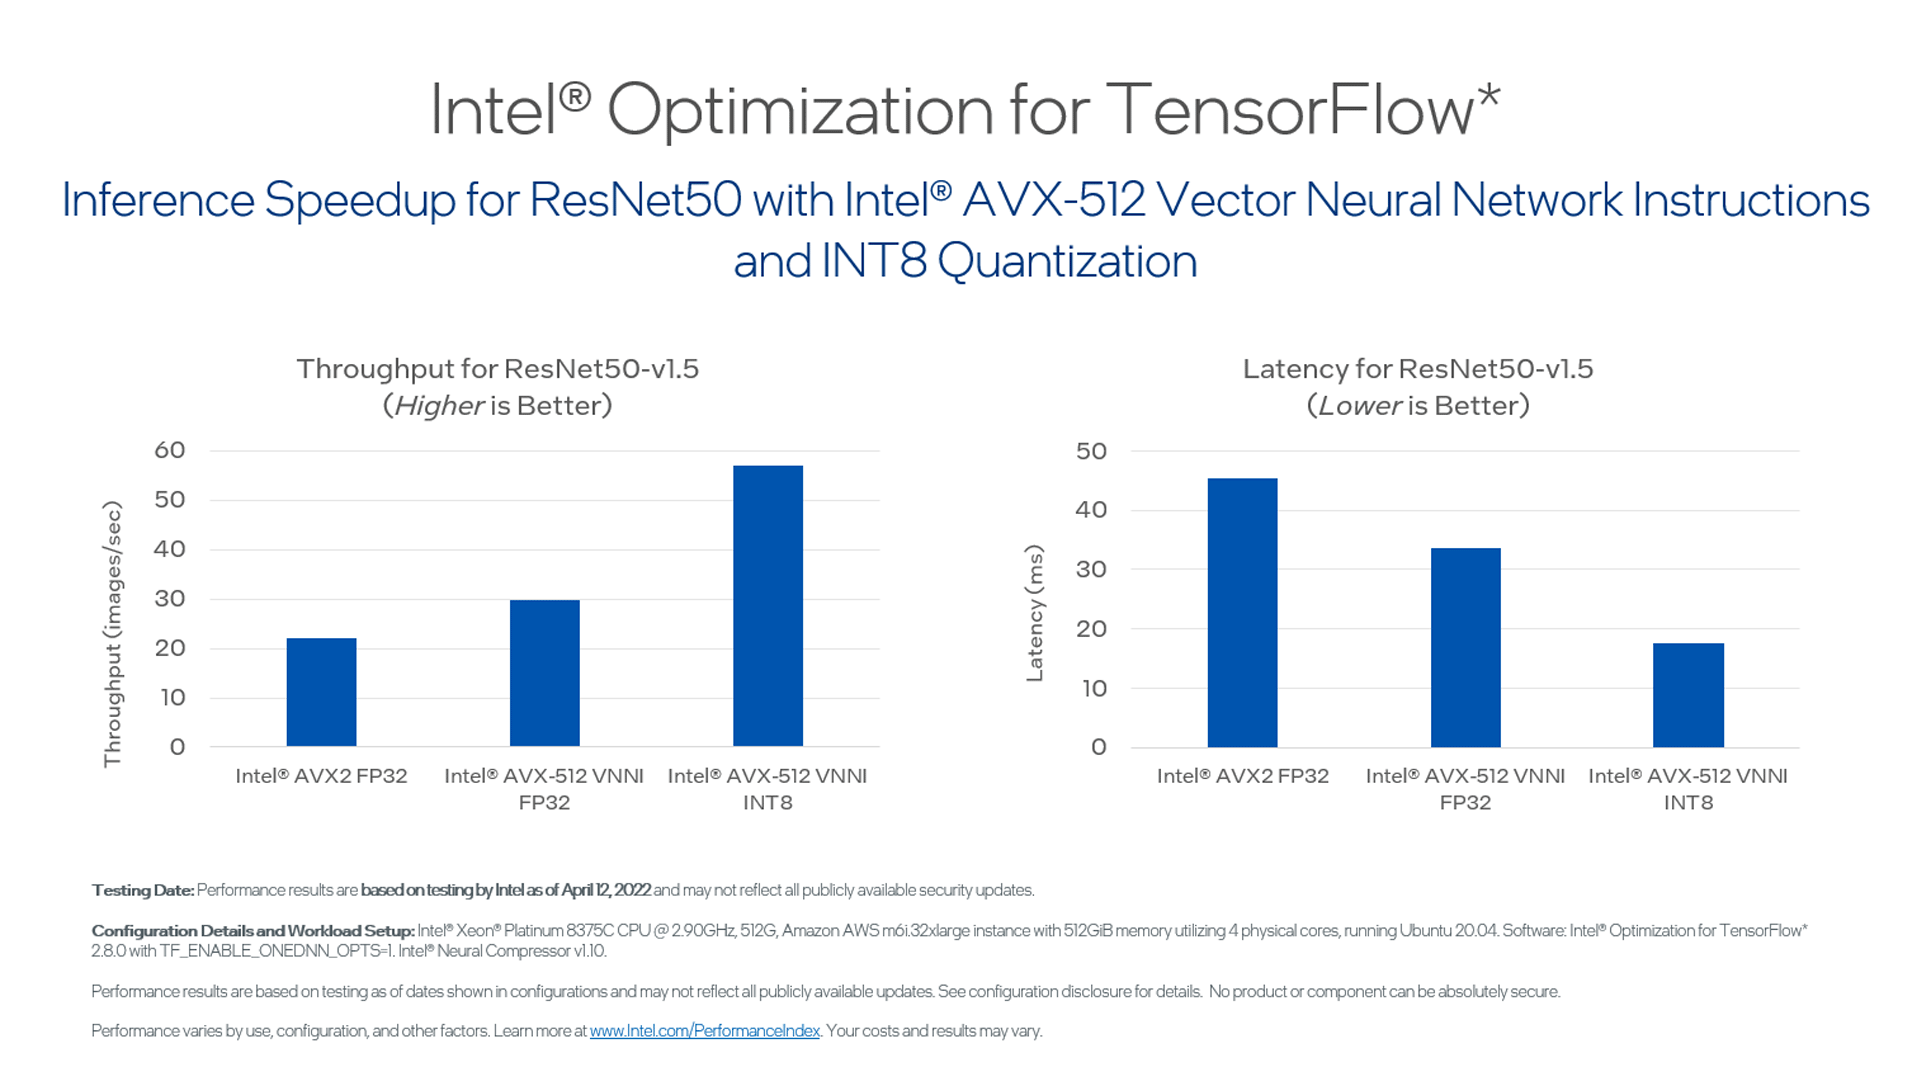 Deep learning inference throughput and latency comparisons using Intel® AVX-512 VNNI instructions along with INT8 quantization. 